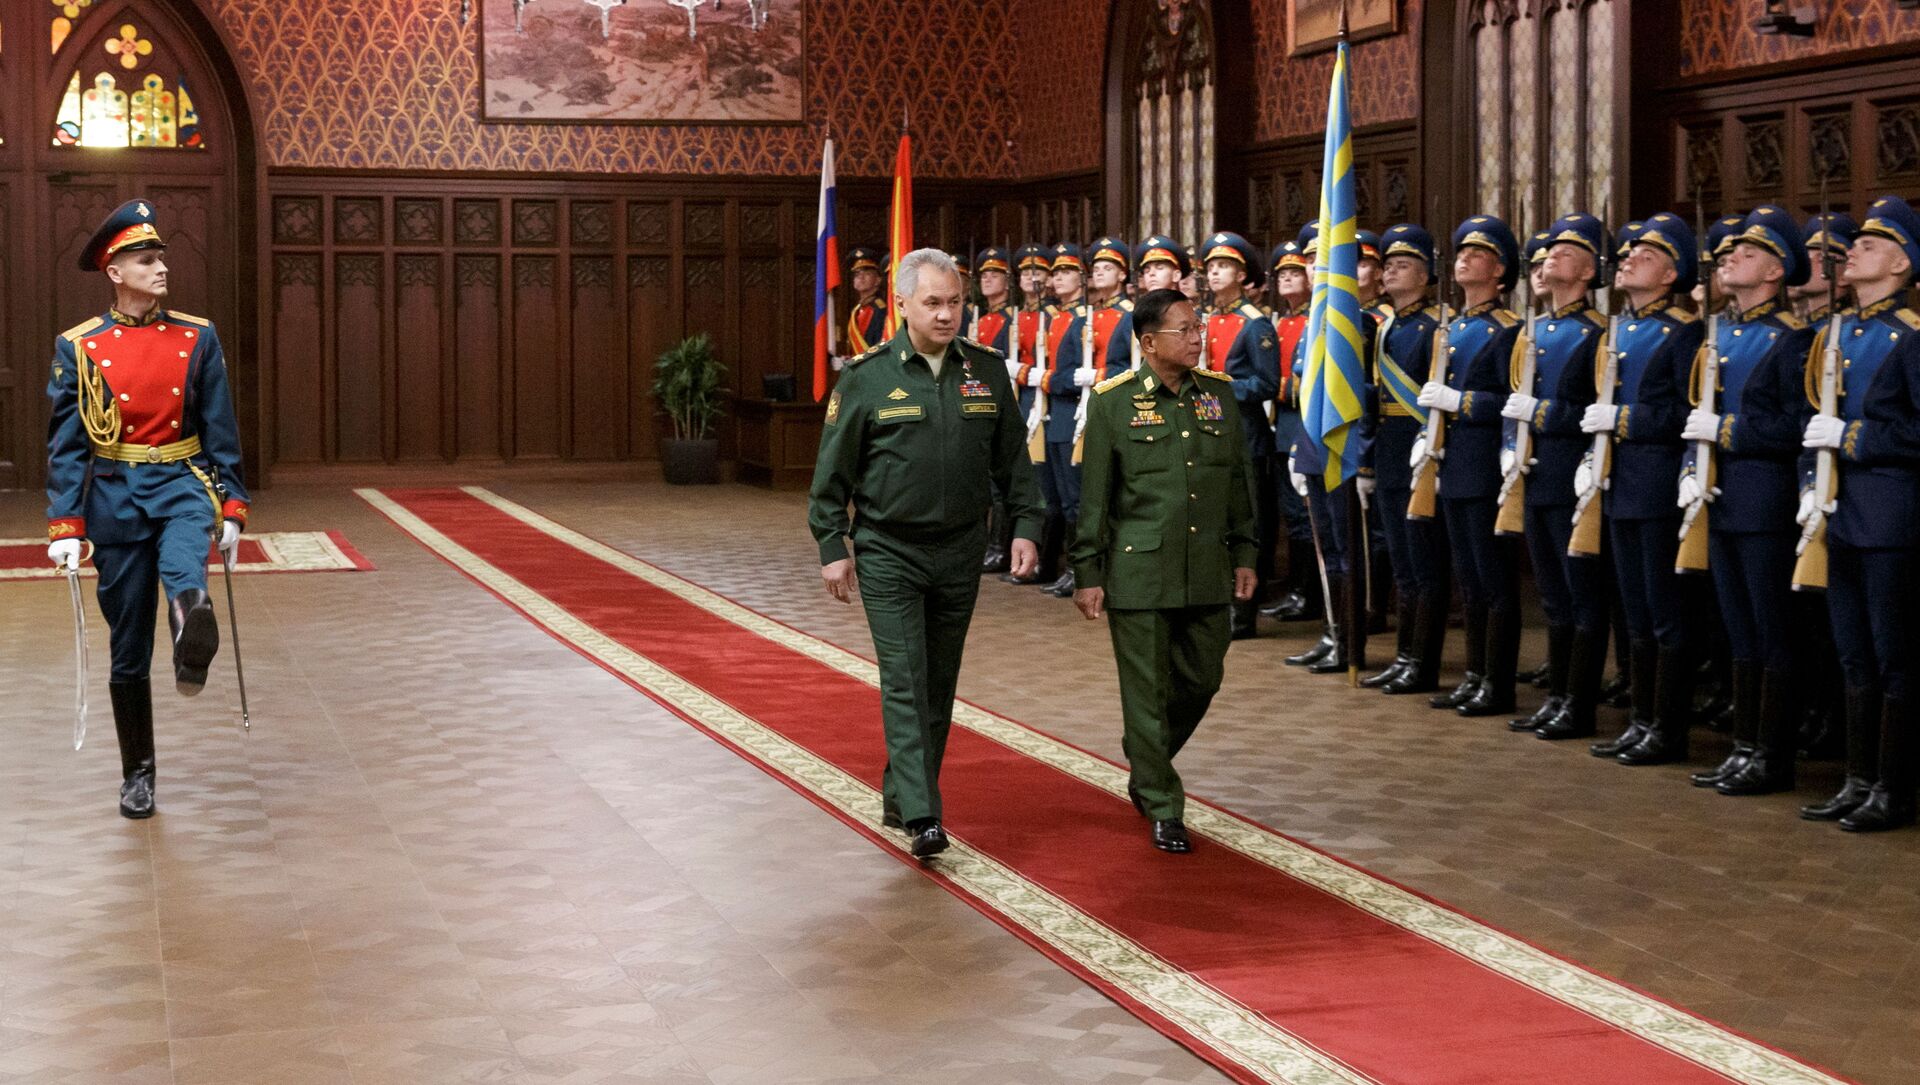 Russia's Defense Minister Sergei Shoigu and Myanmar's Commander in-Chief Senior General Min Aung Hlaing walk past the honour guard prior to their talks in Moscow, Russia June 22, 2021. - Sputnik International, 1920, 28.06.2021